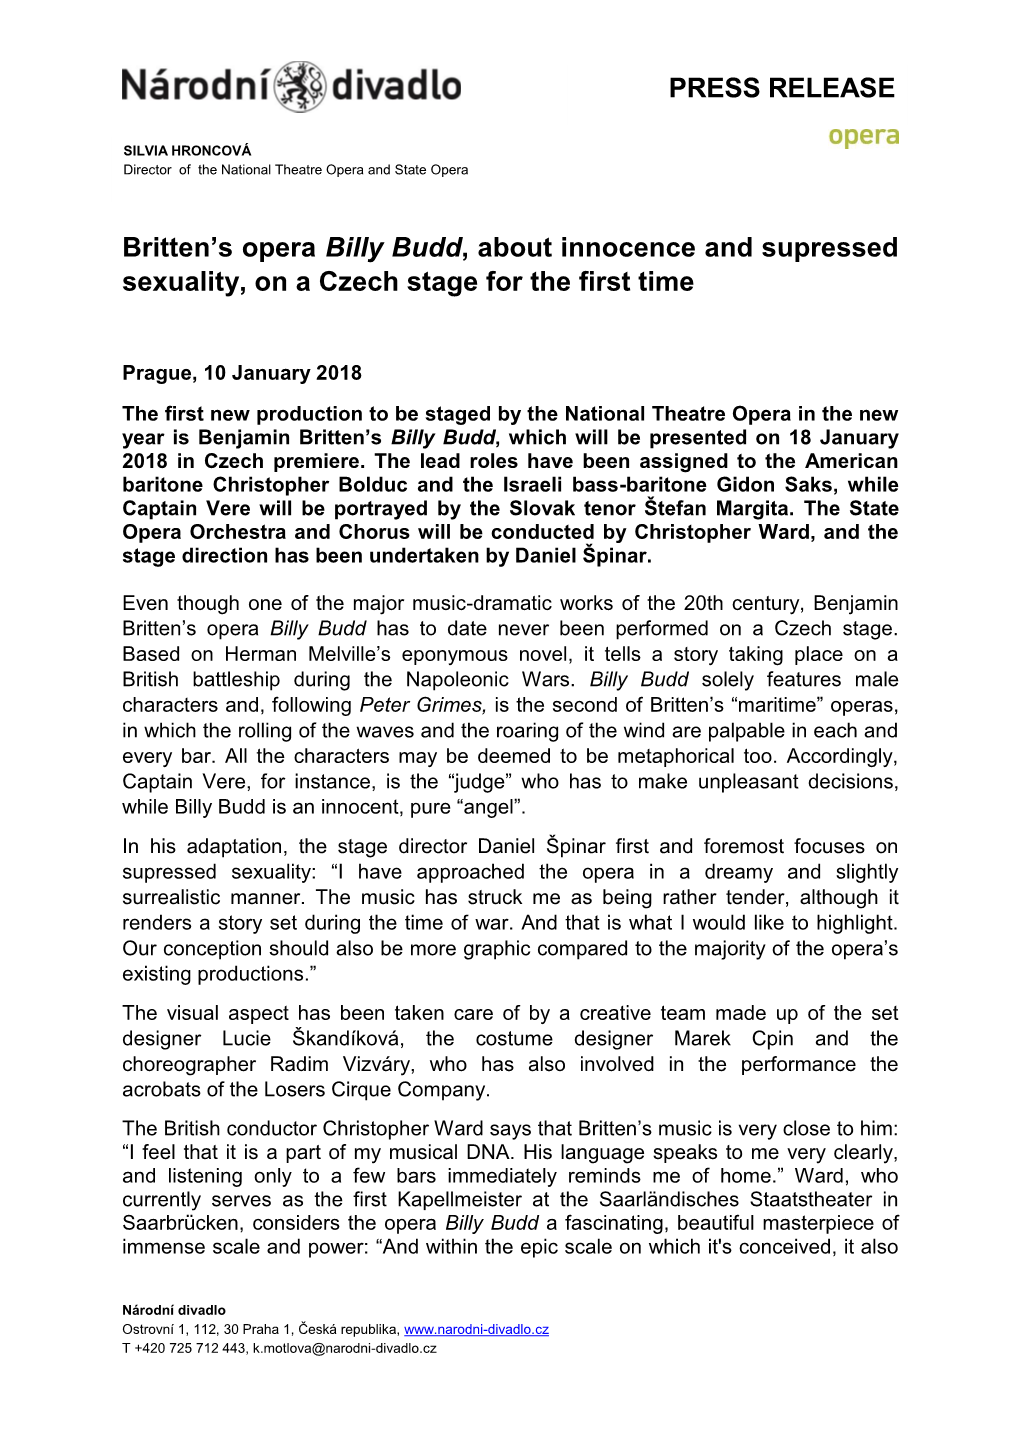 PRESS RELEASE Britten's Opera Billy Budd, About Innocence And